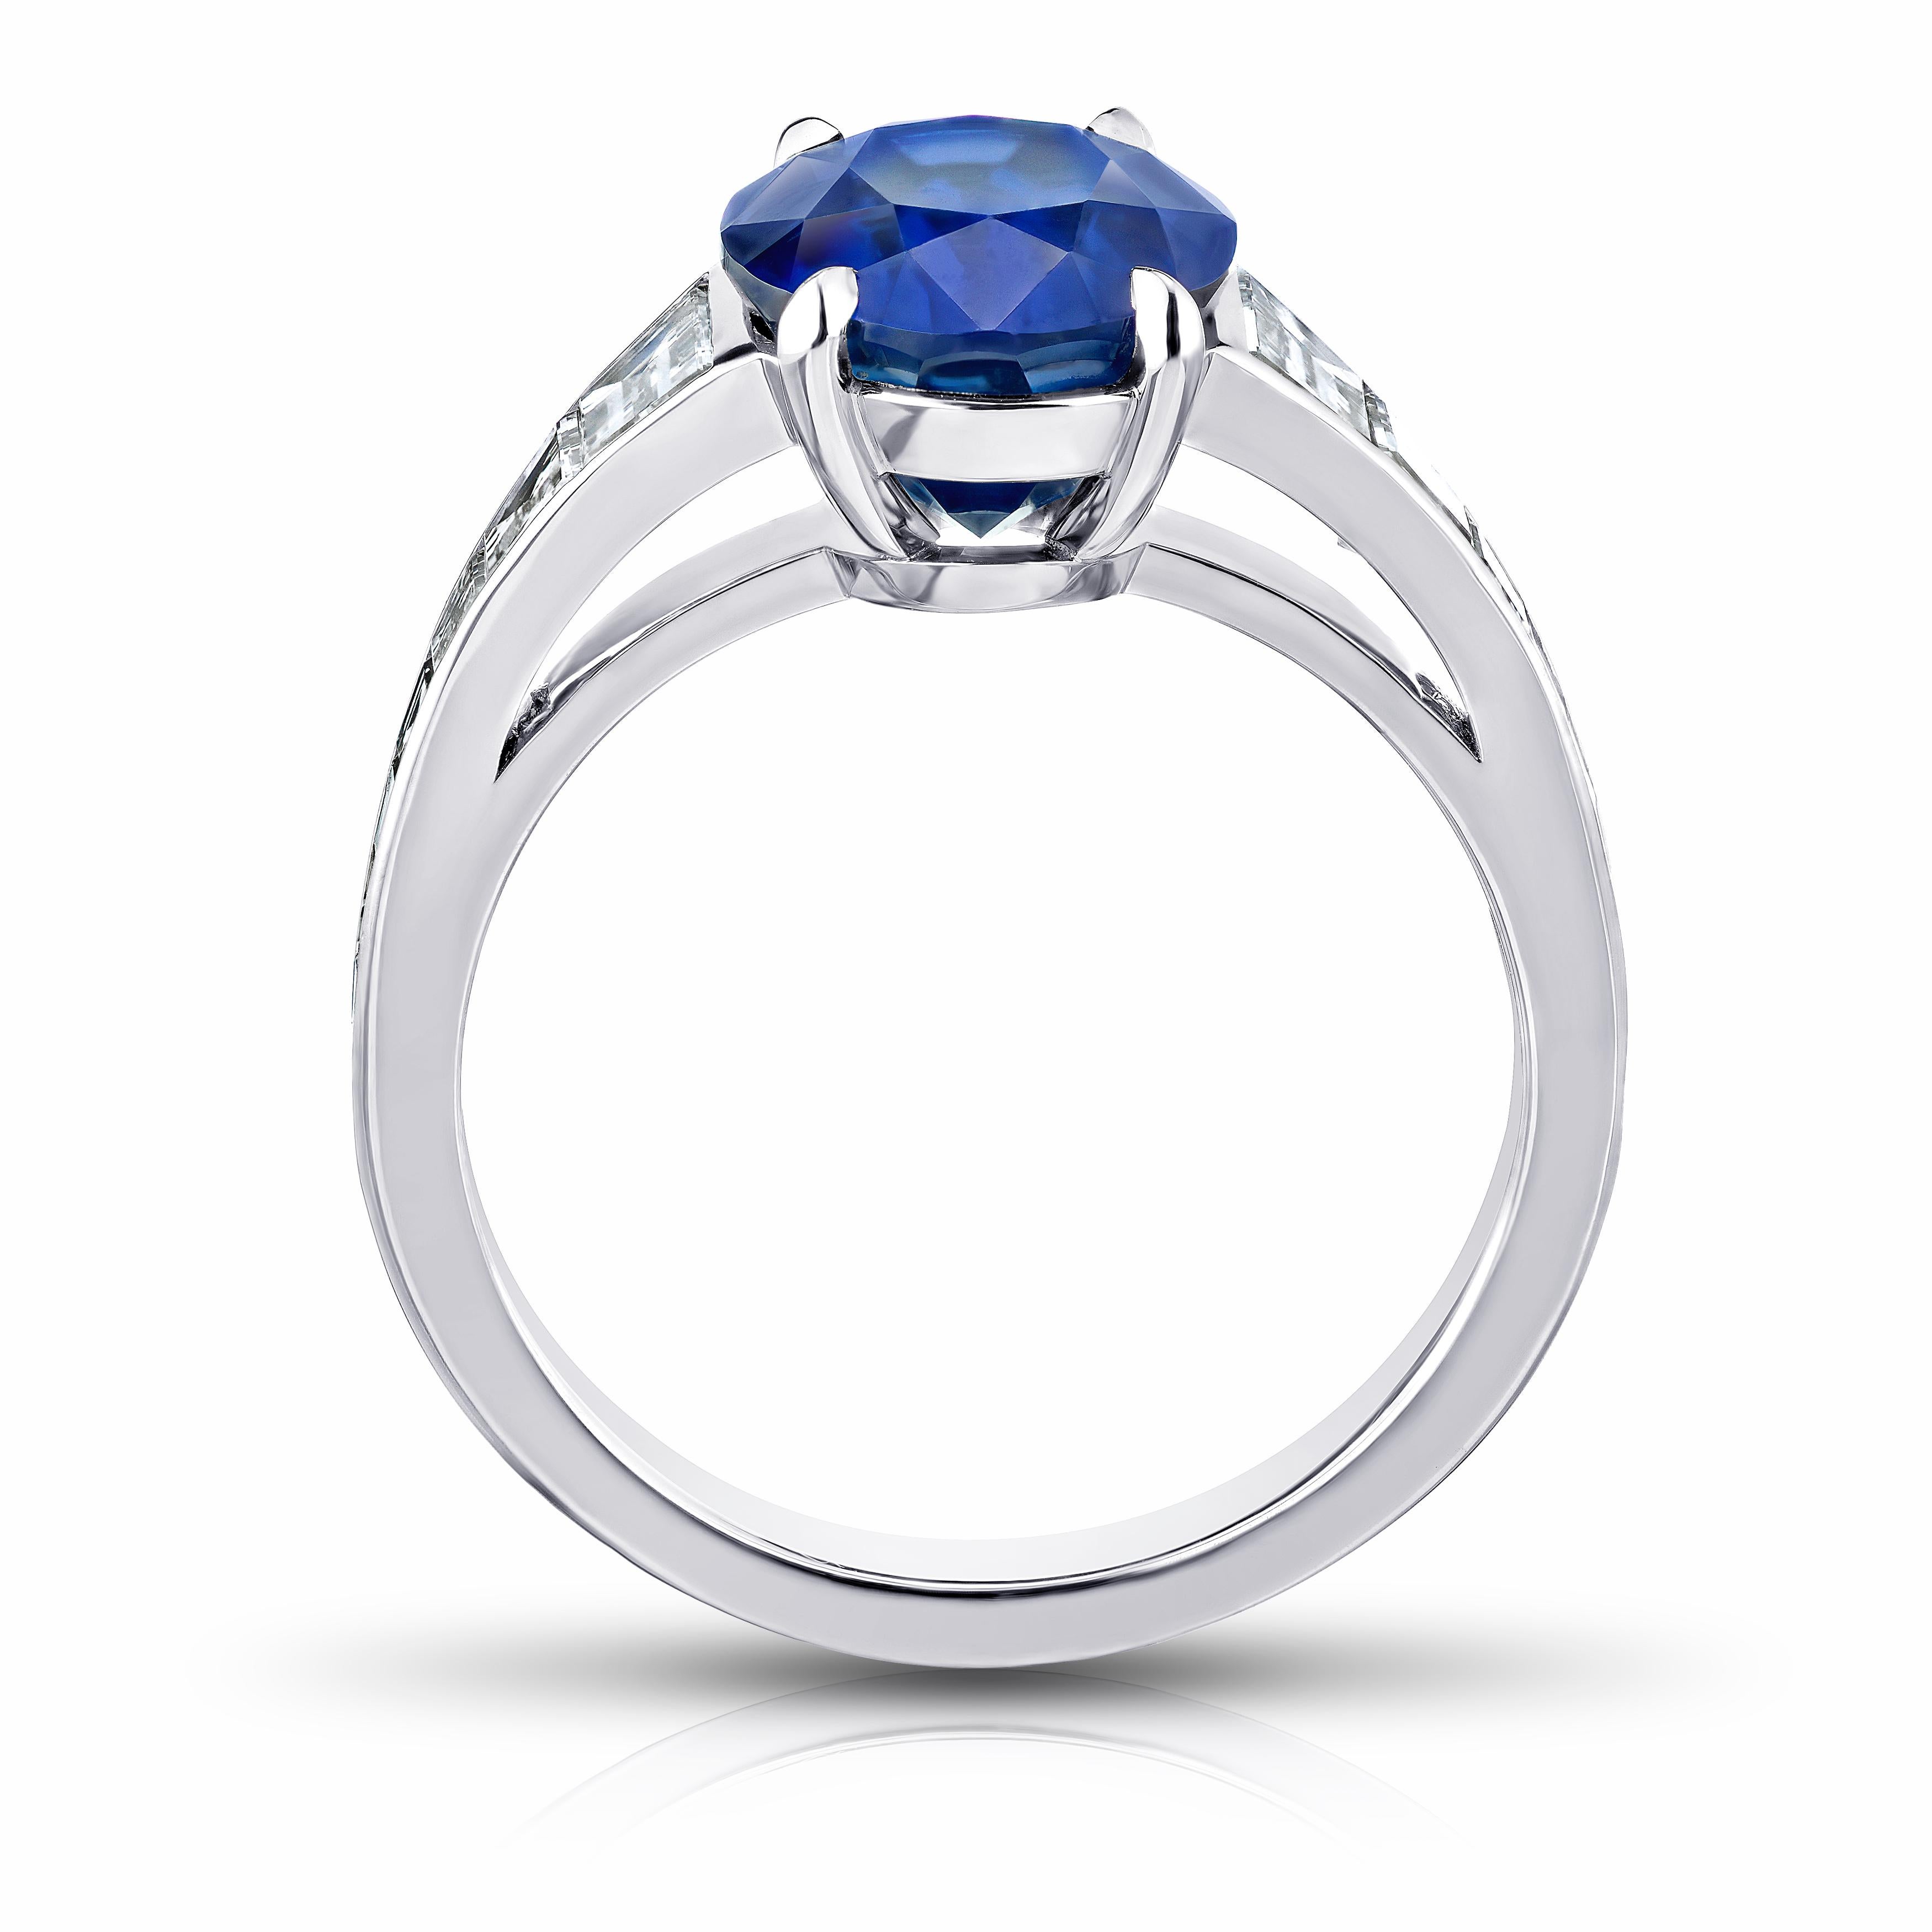 Contemporary 4.91 Carat Oval Blue Sapphire and Diamond Ring